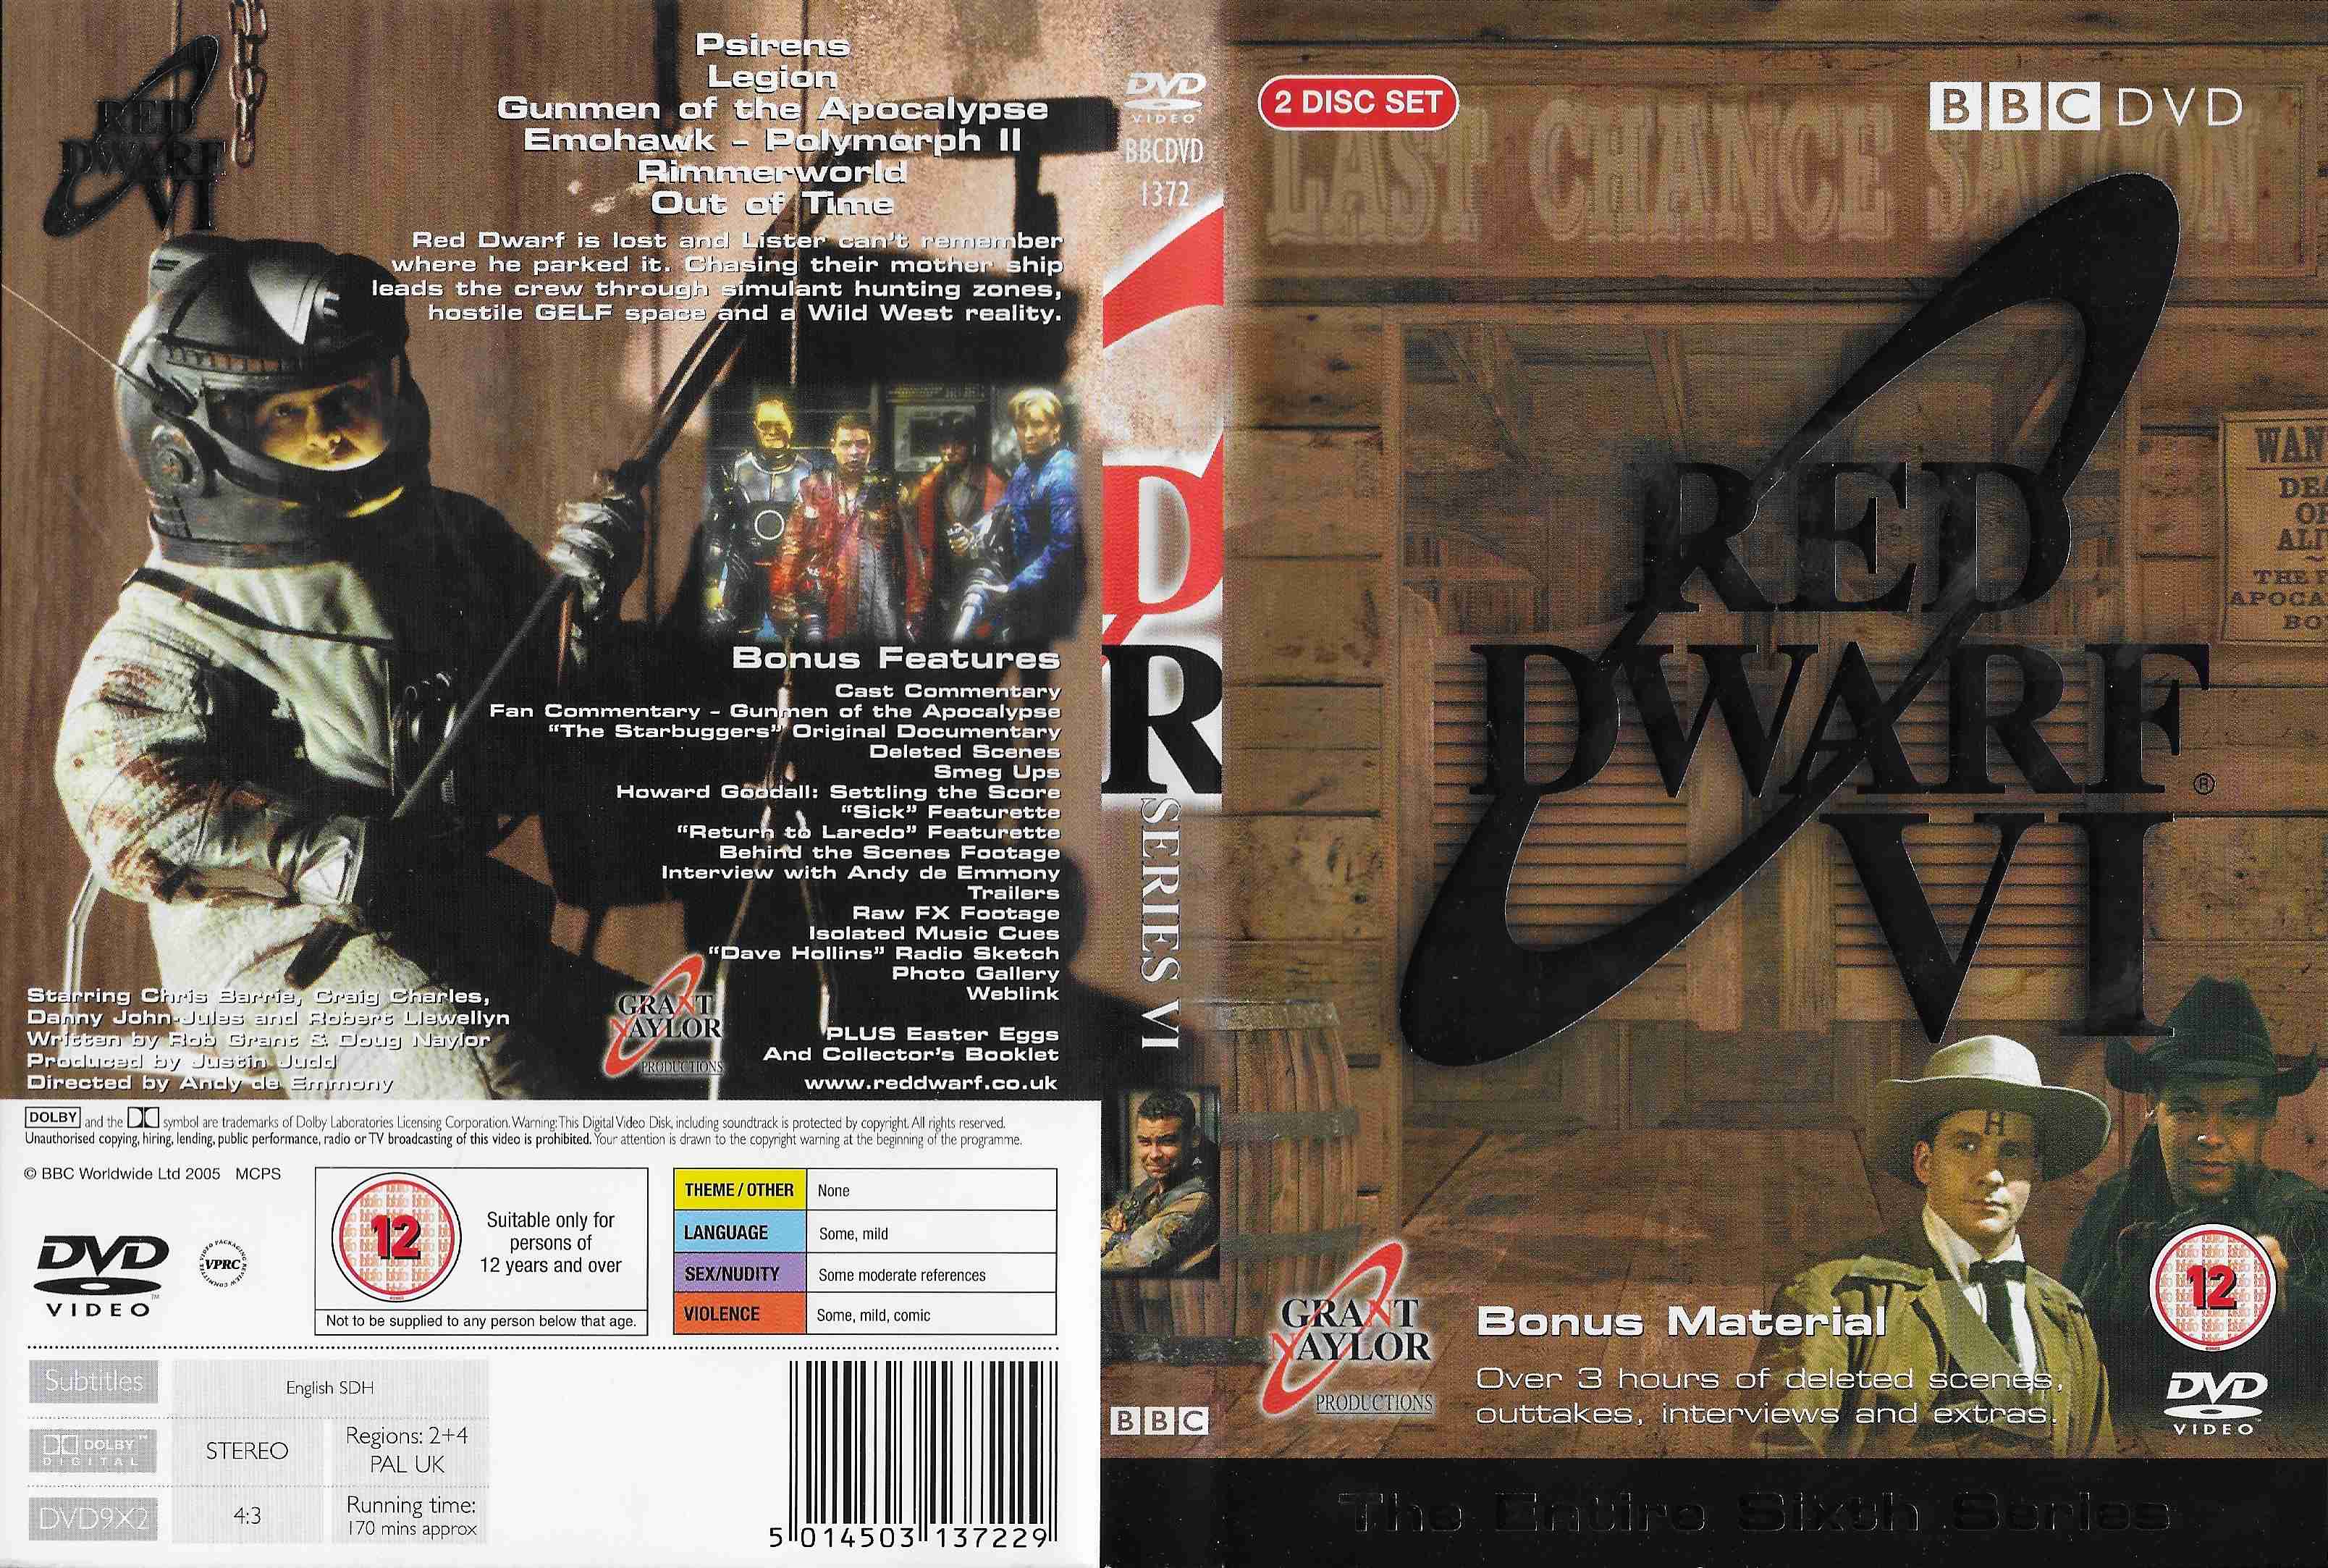 Picture of BBCDVD 1372 Red dwarf - Series VI by artist Rob Grant / Doug Naylor from the BBC records and Tapes library